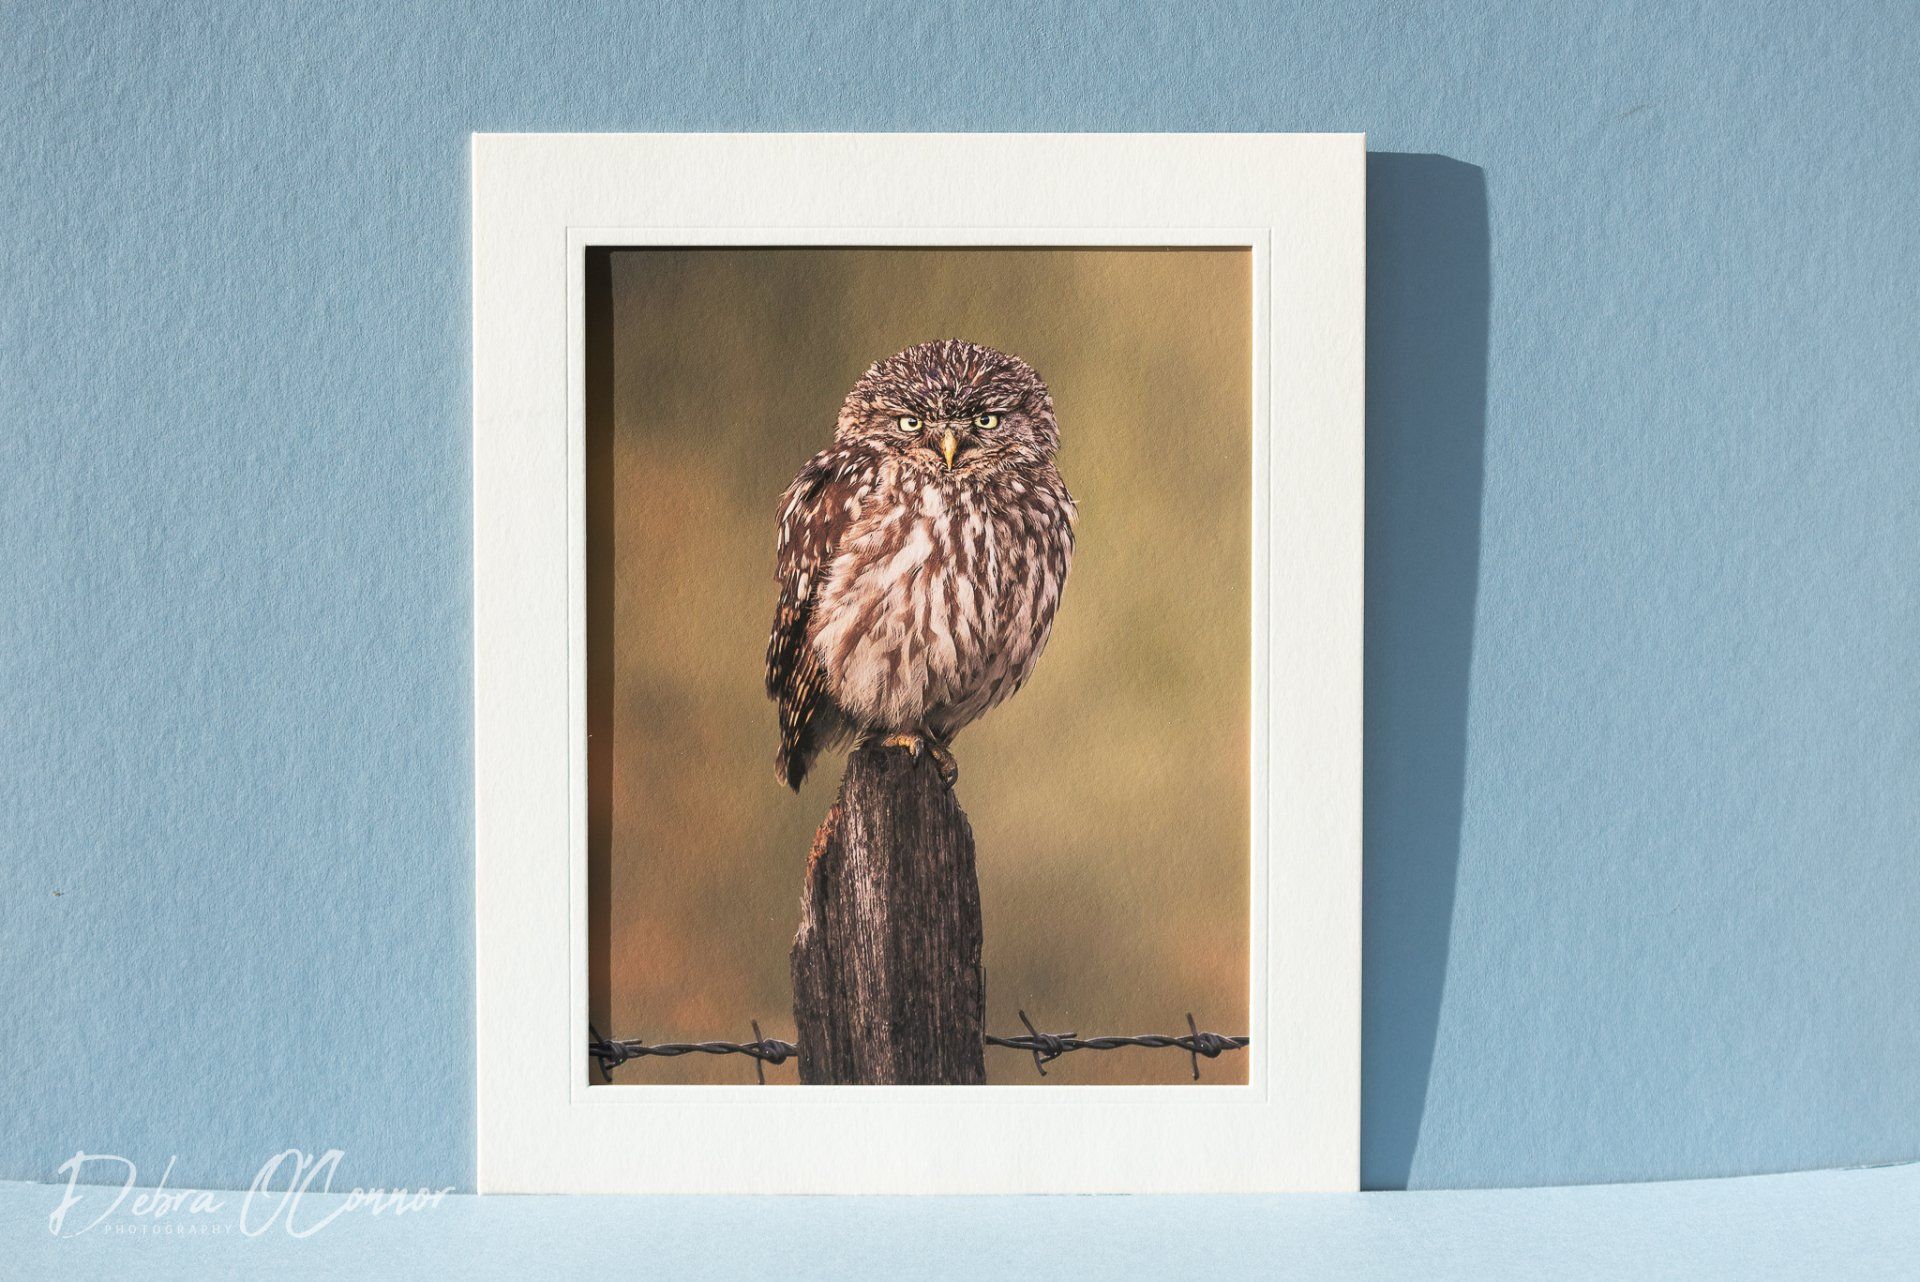 For sale, beautiful little owl photograph